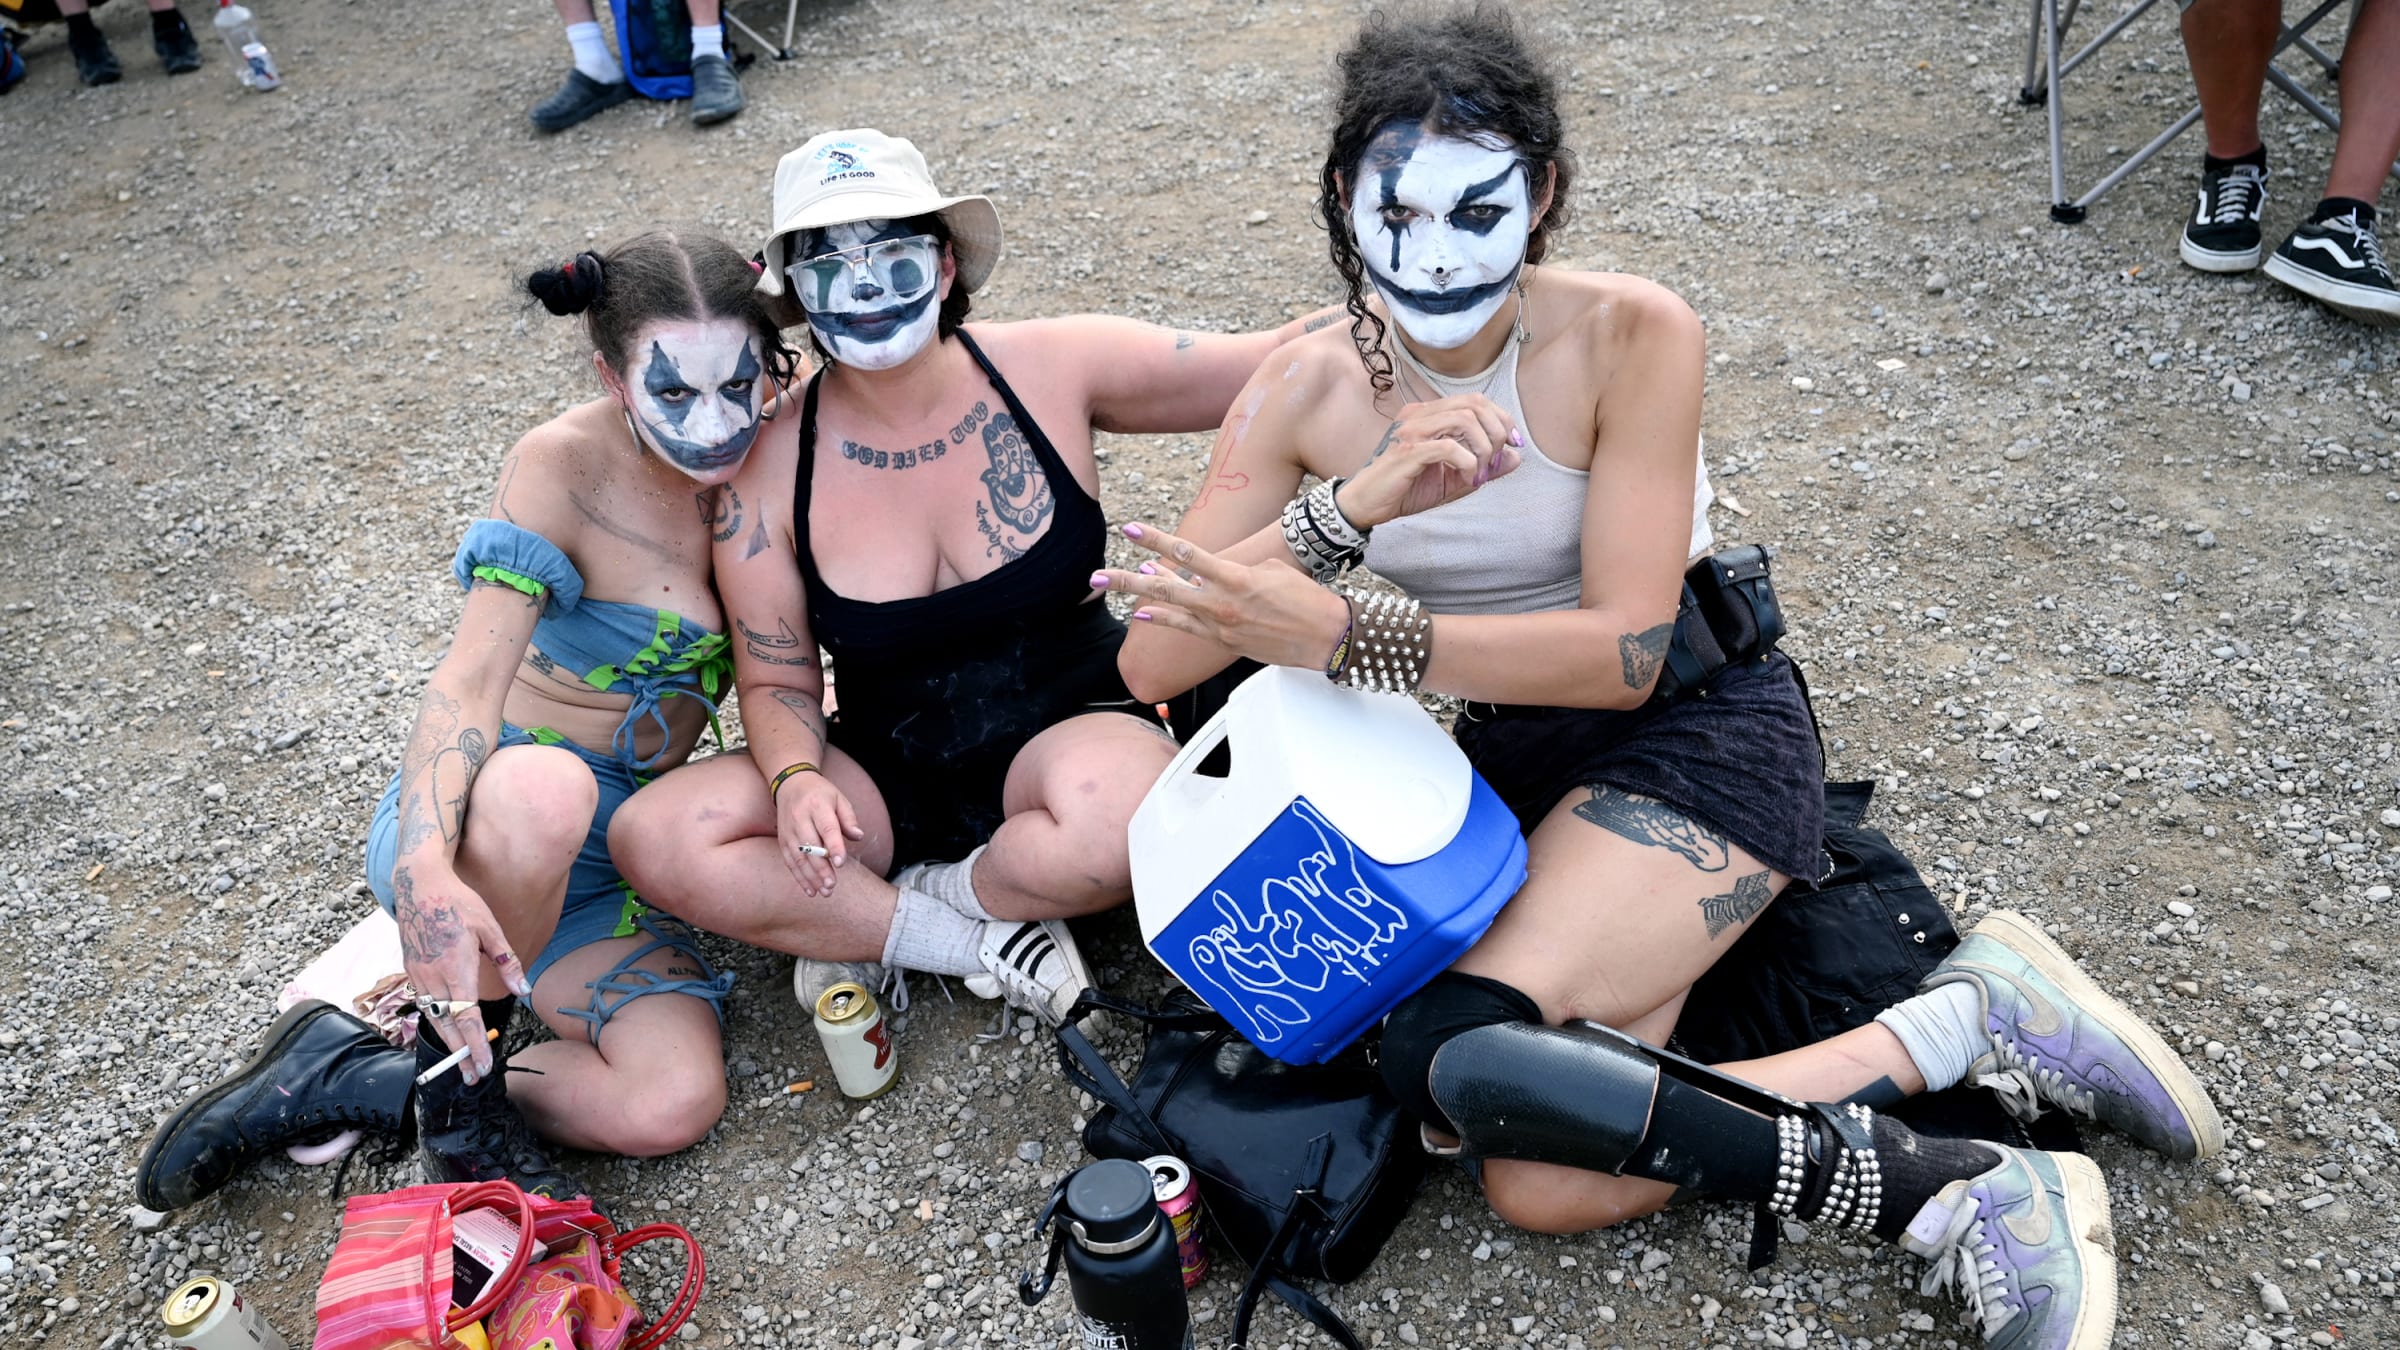 A group of fans pose together at the 2023 Gathering of the Juggalos